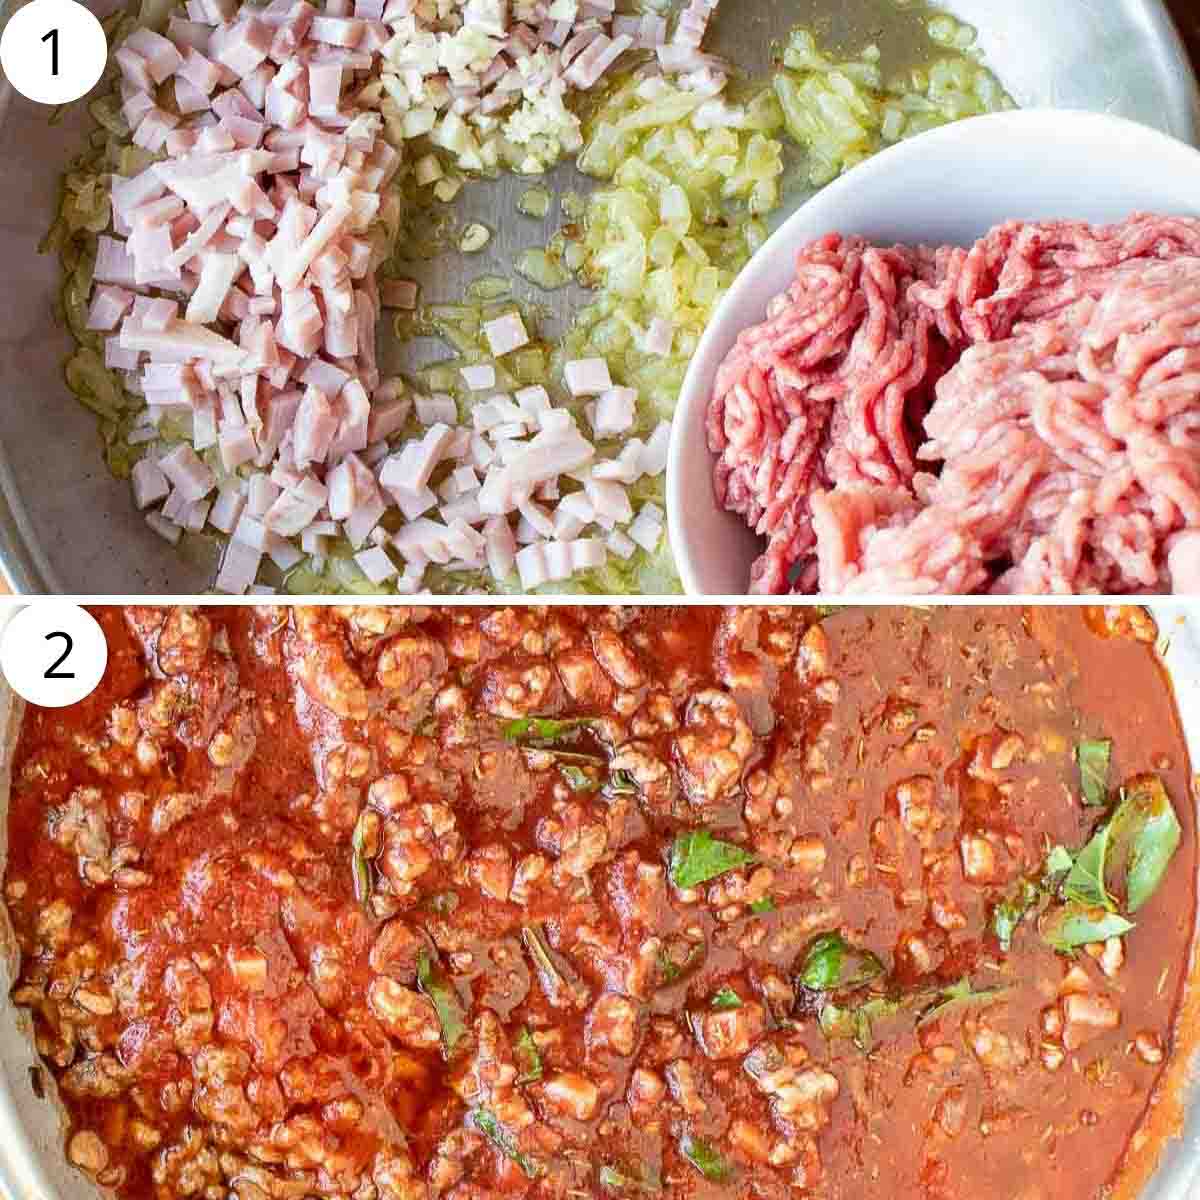 Two images. top image is sauteed onion, chopped bacon and minced meat. Bottom image is tomato and minced meat ragù sauce.